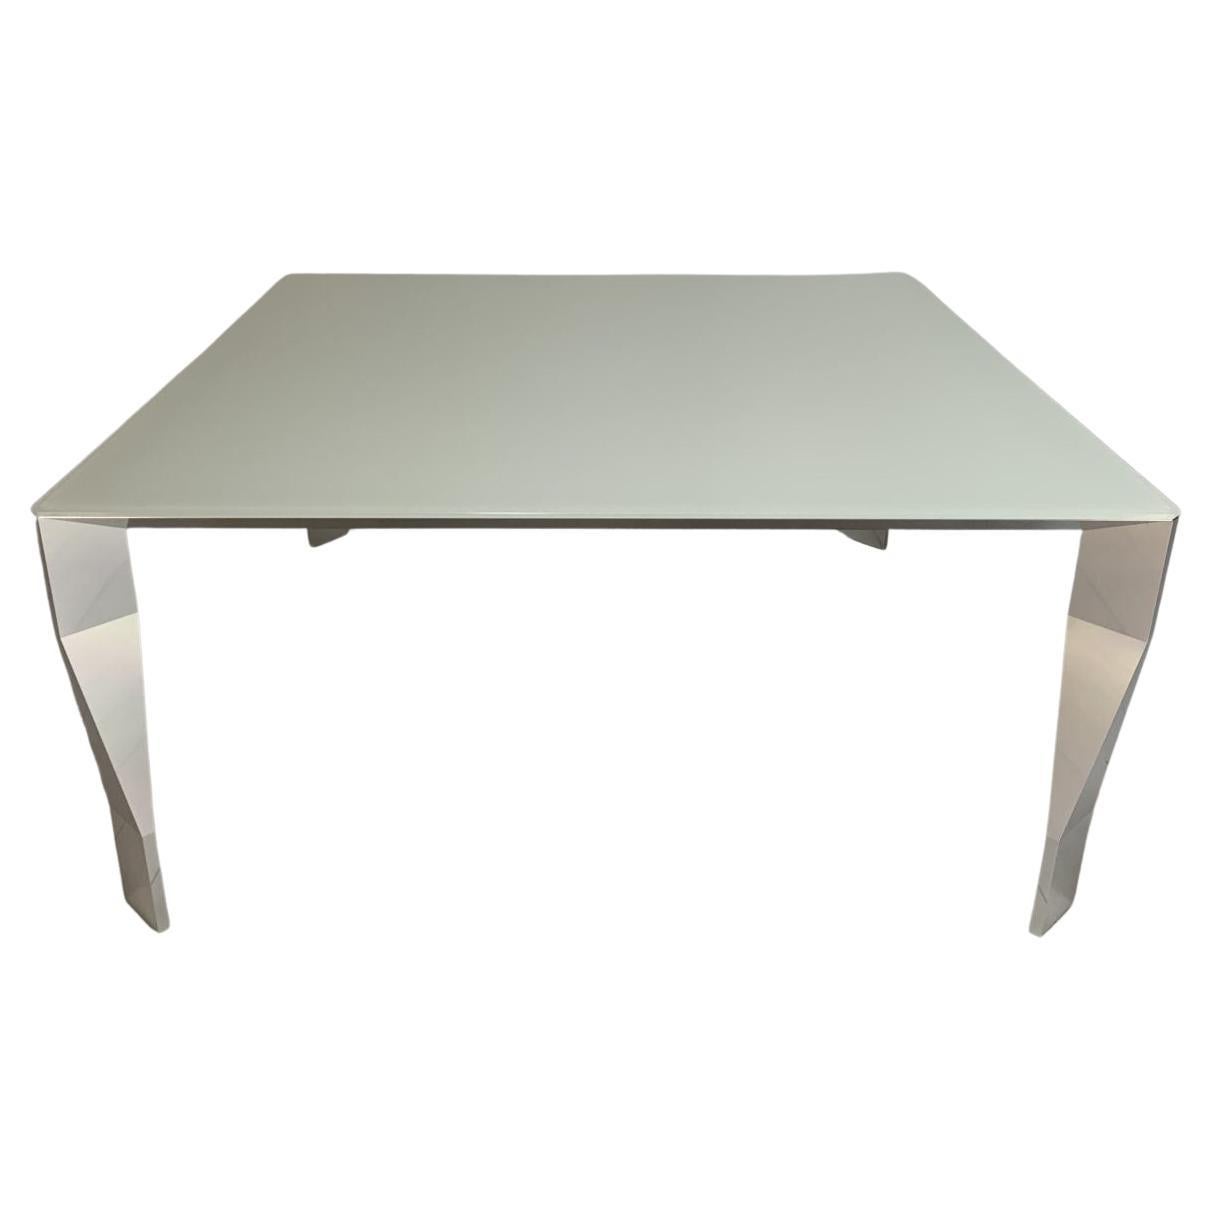 Molteni & C “Diamond” Table, Square Occasional/Dining Table, in Glass